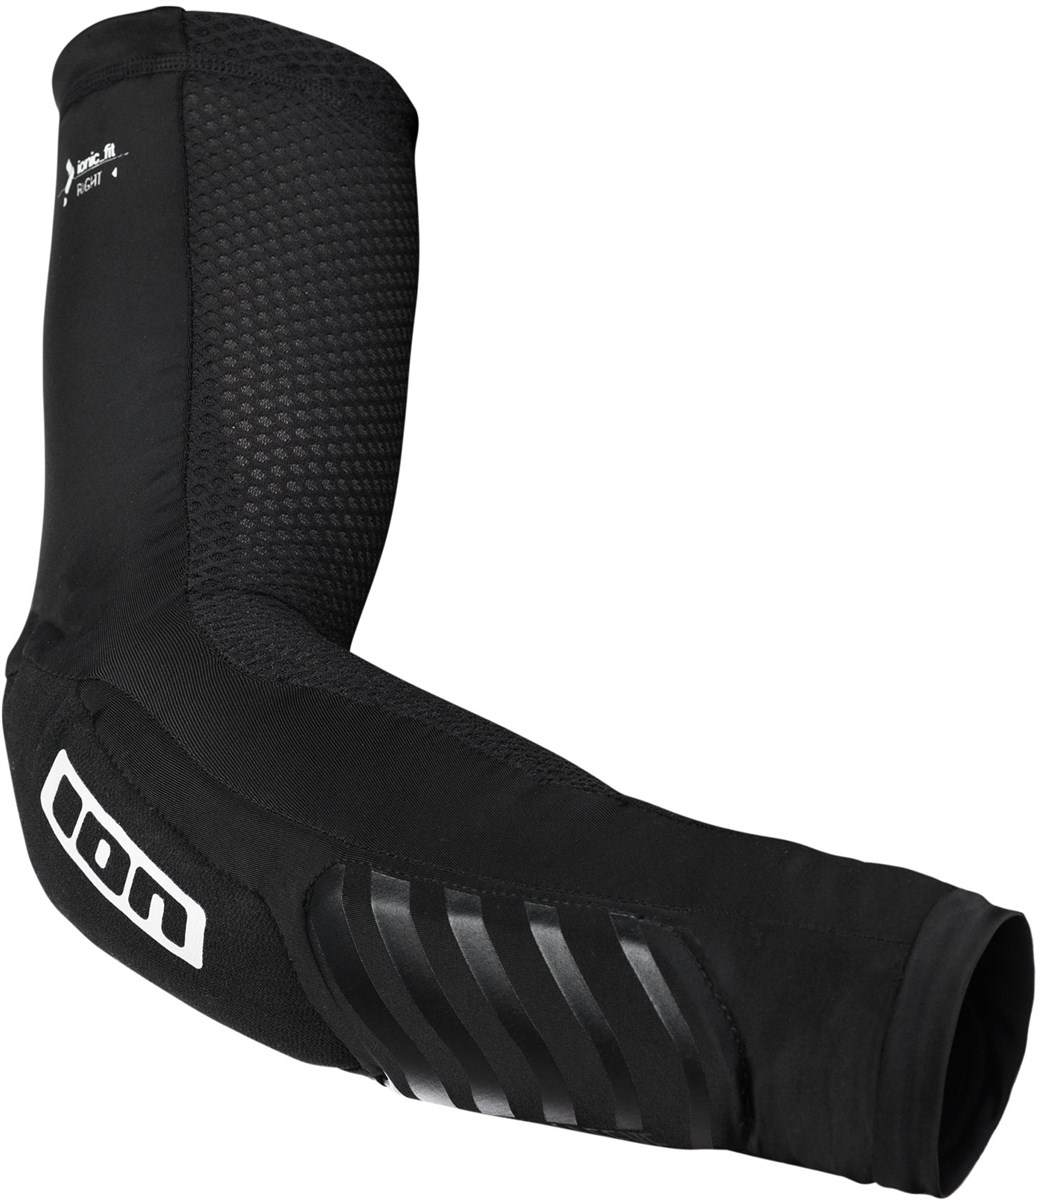 Ion E Sleeve Protection Elbow Guards SS17 product image